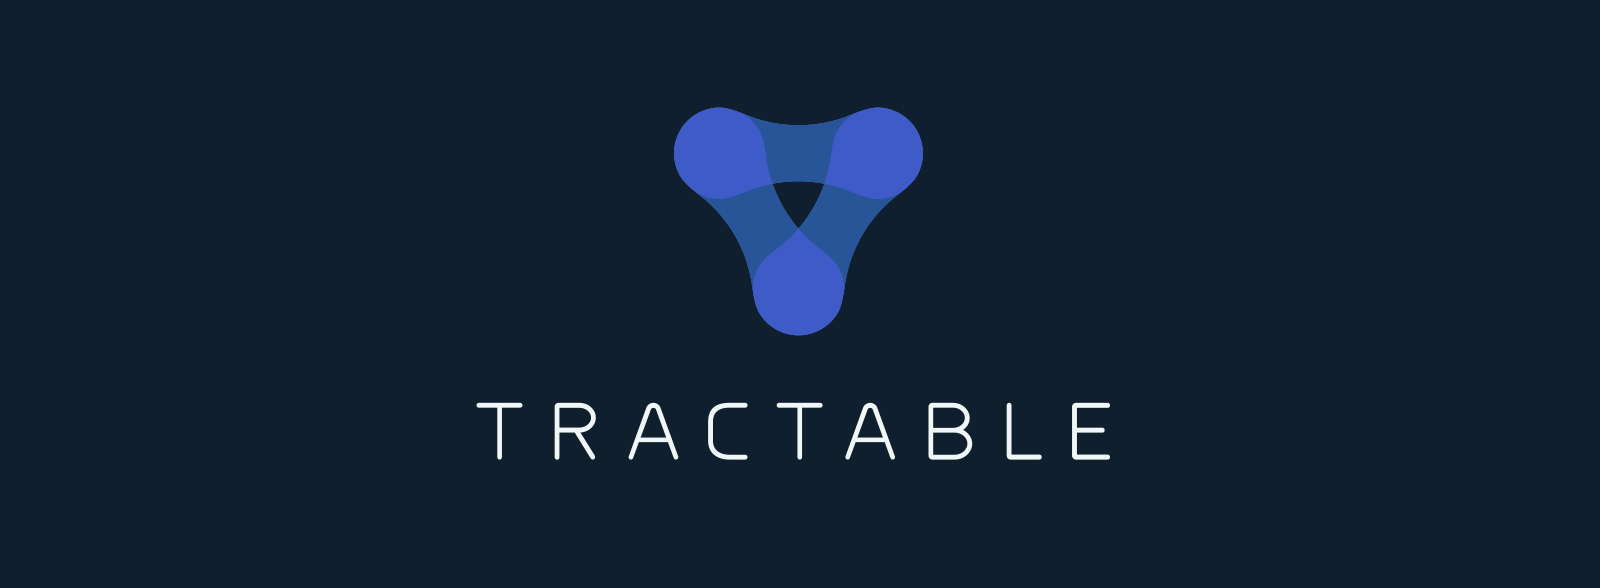 An image of tractable, AI, How Tractable is revolutionising insurance with AI